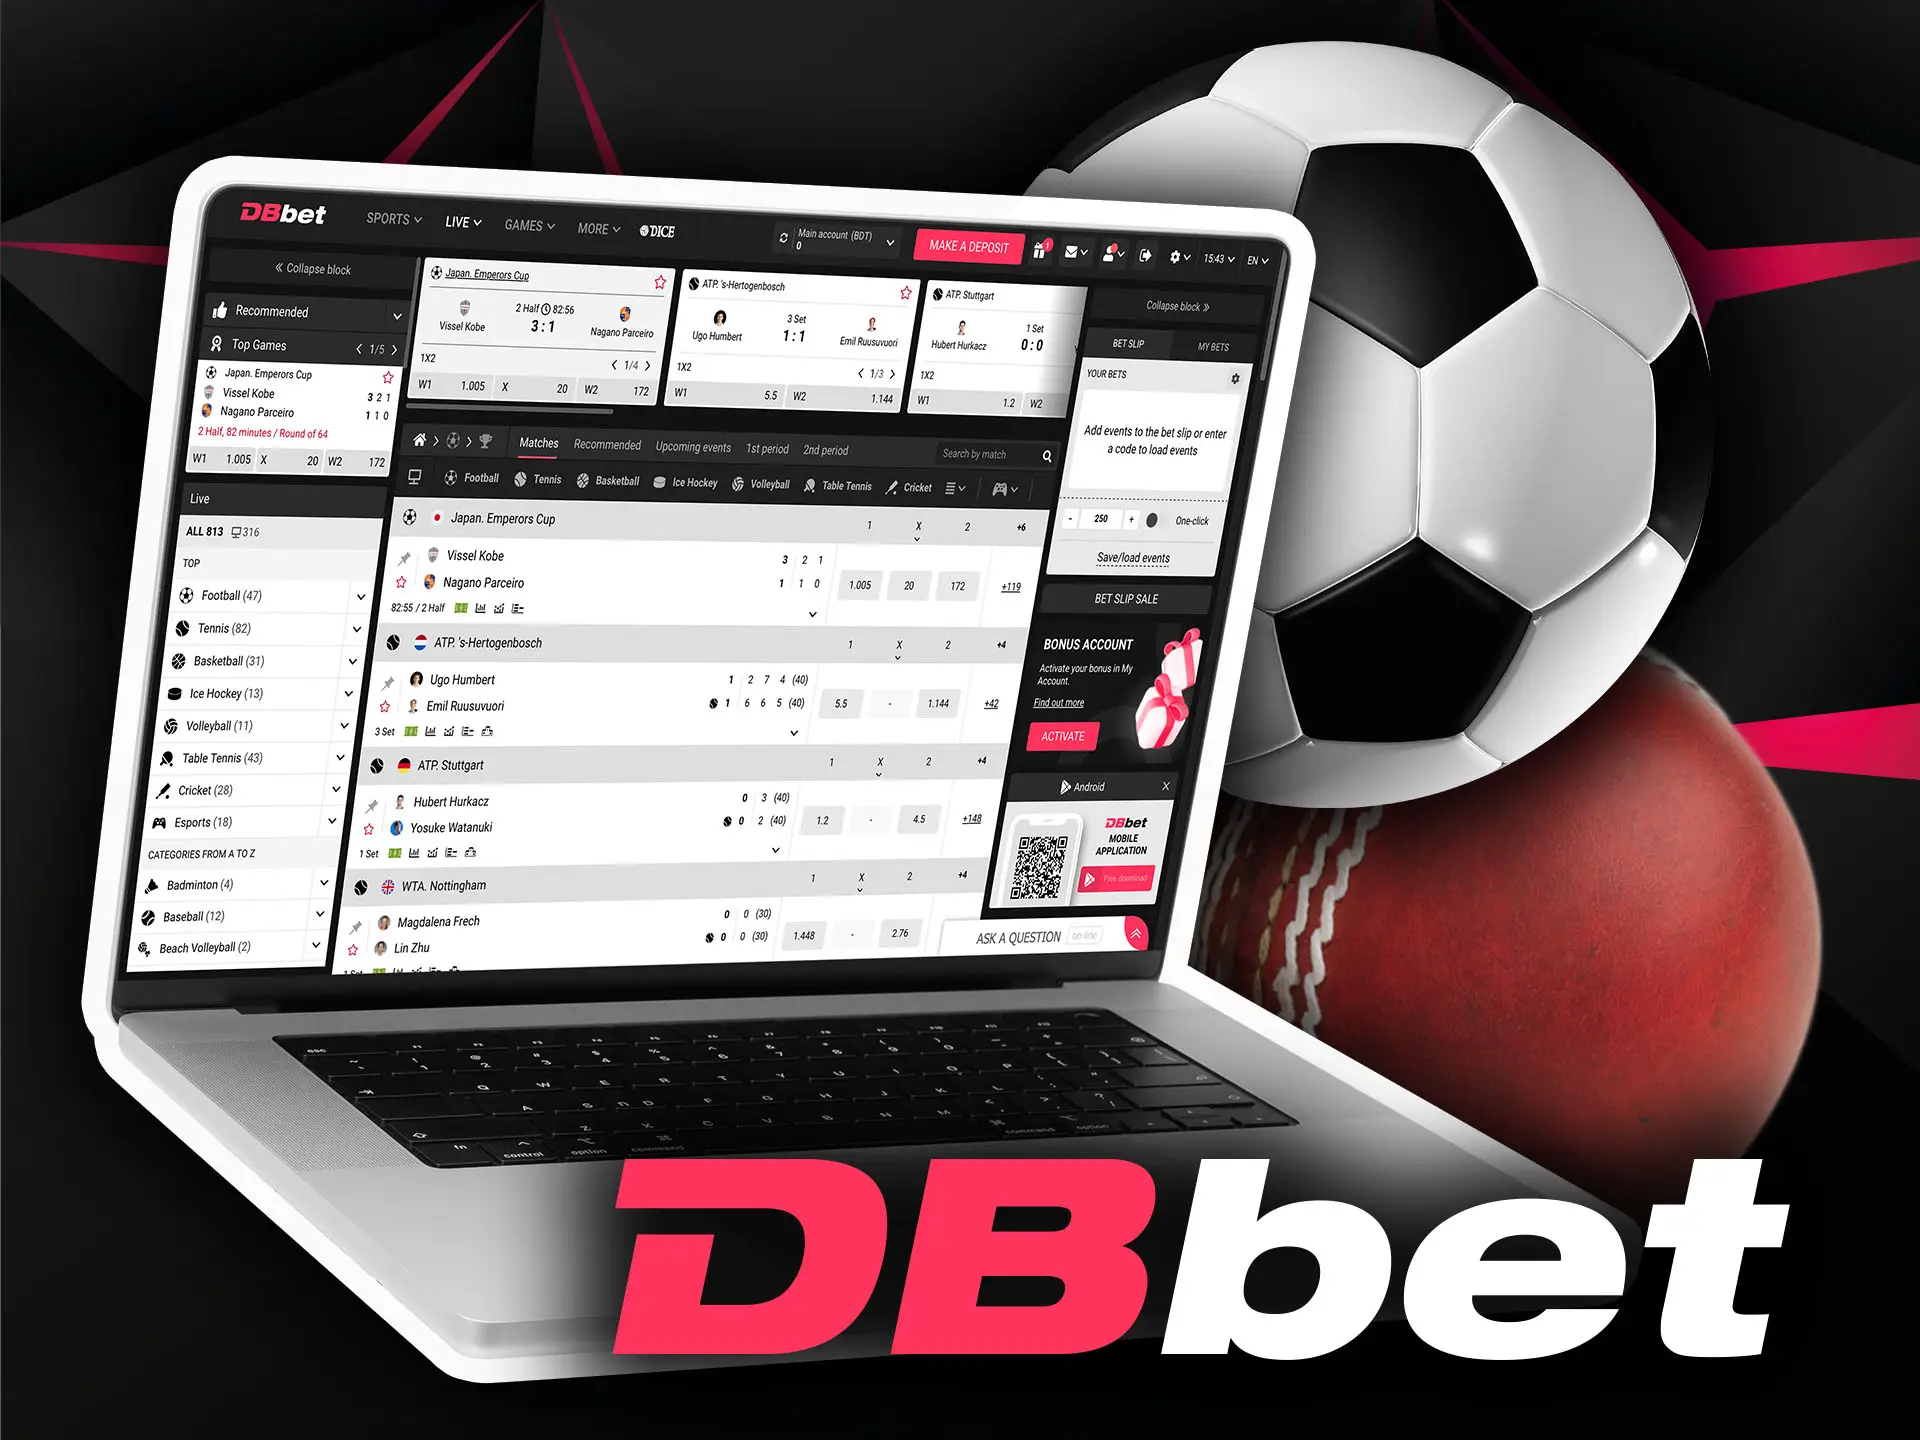 On DBbet you can place bets right during the match.